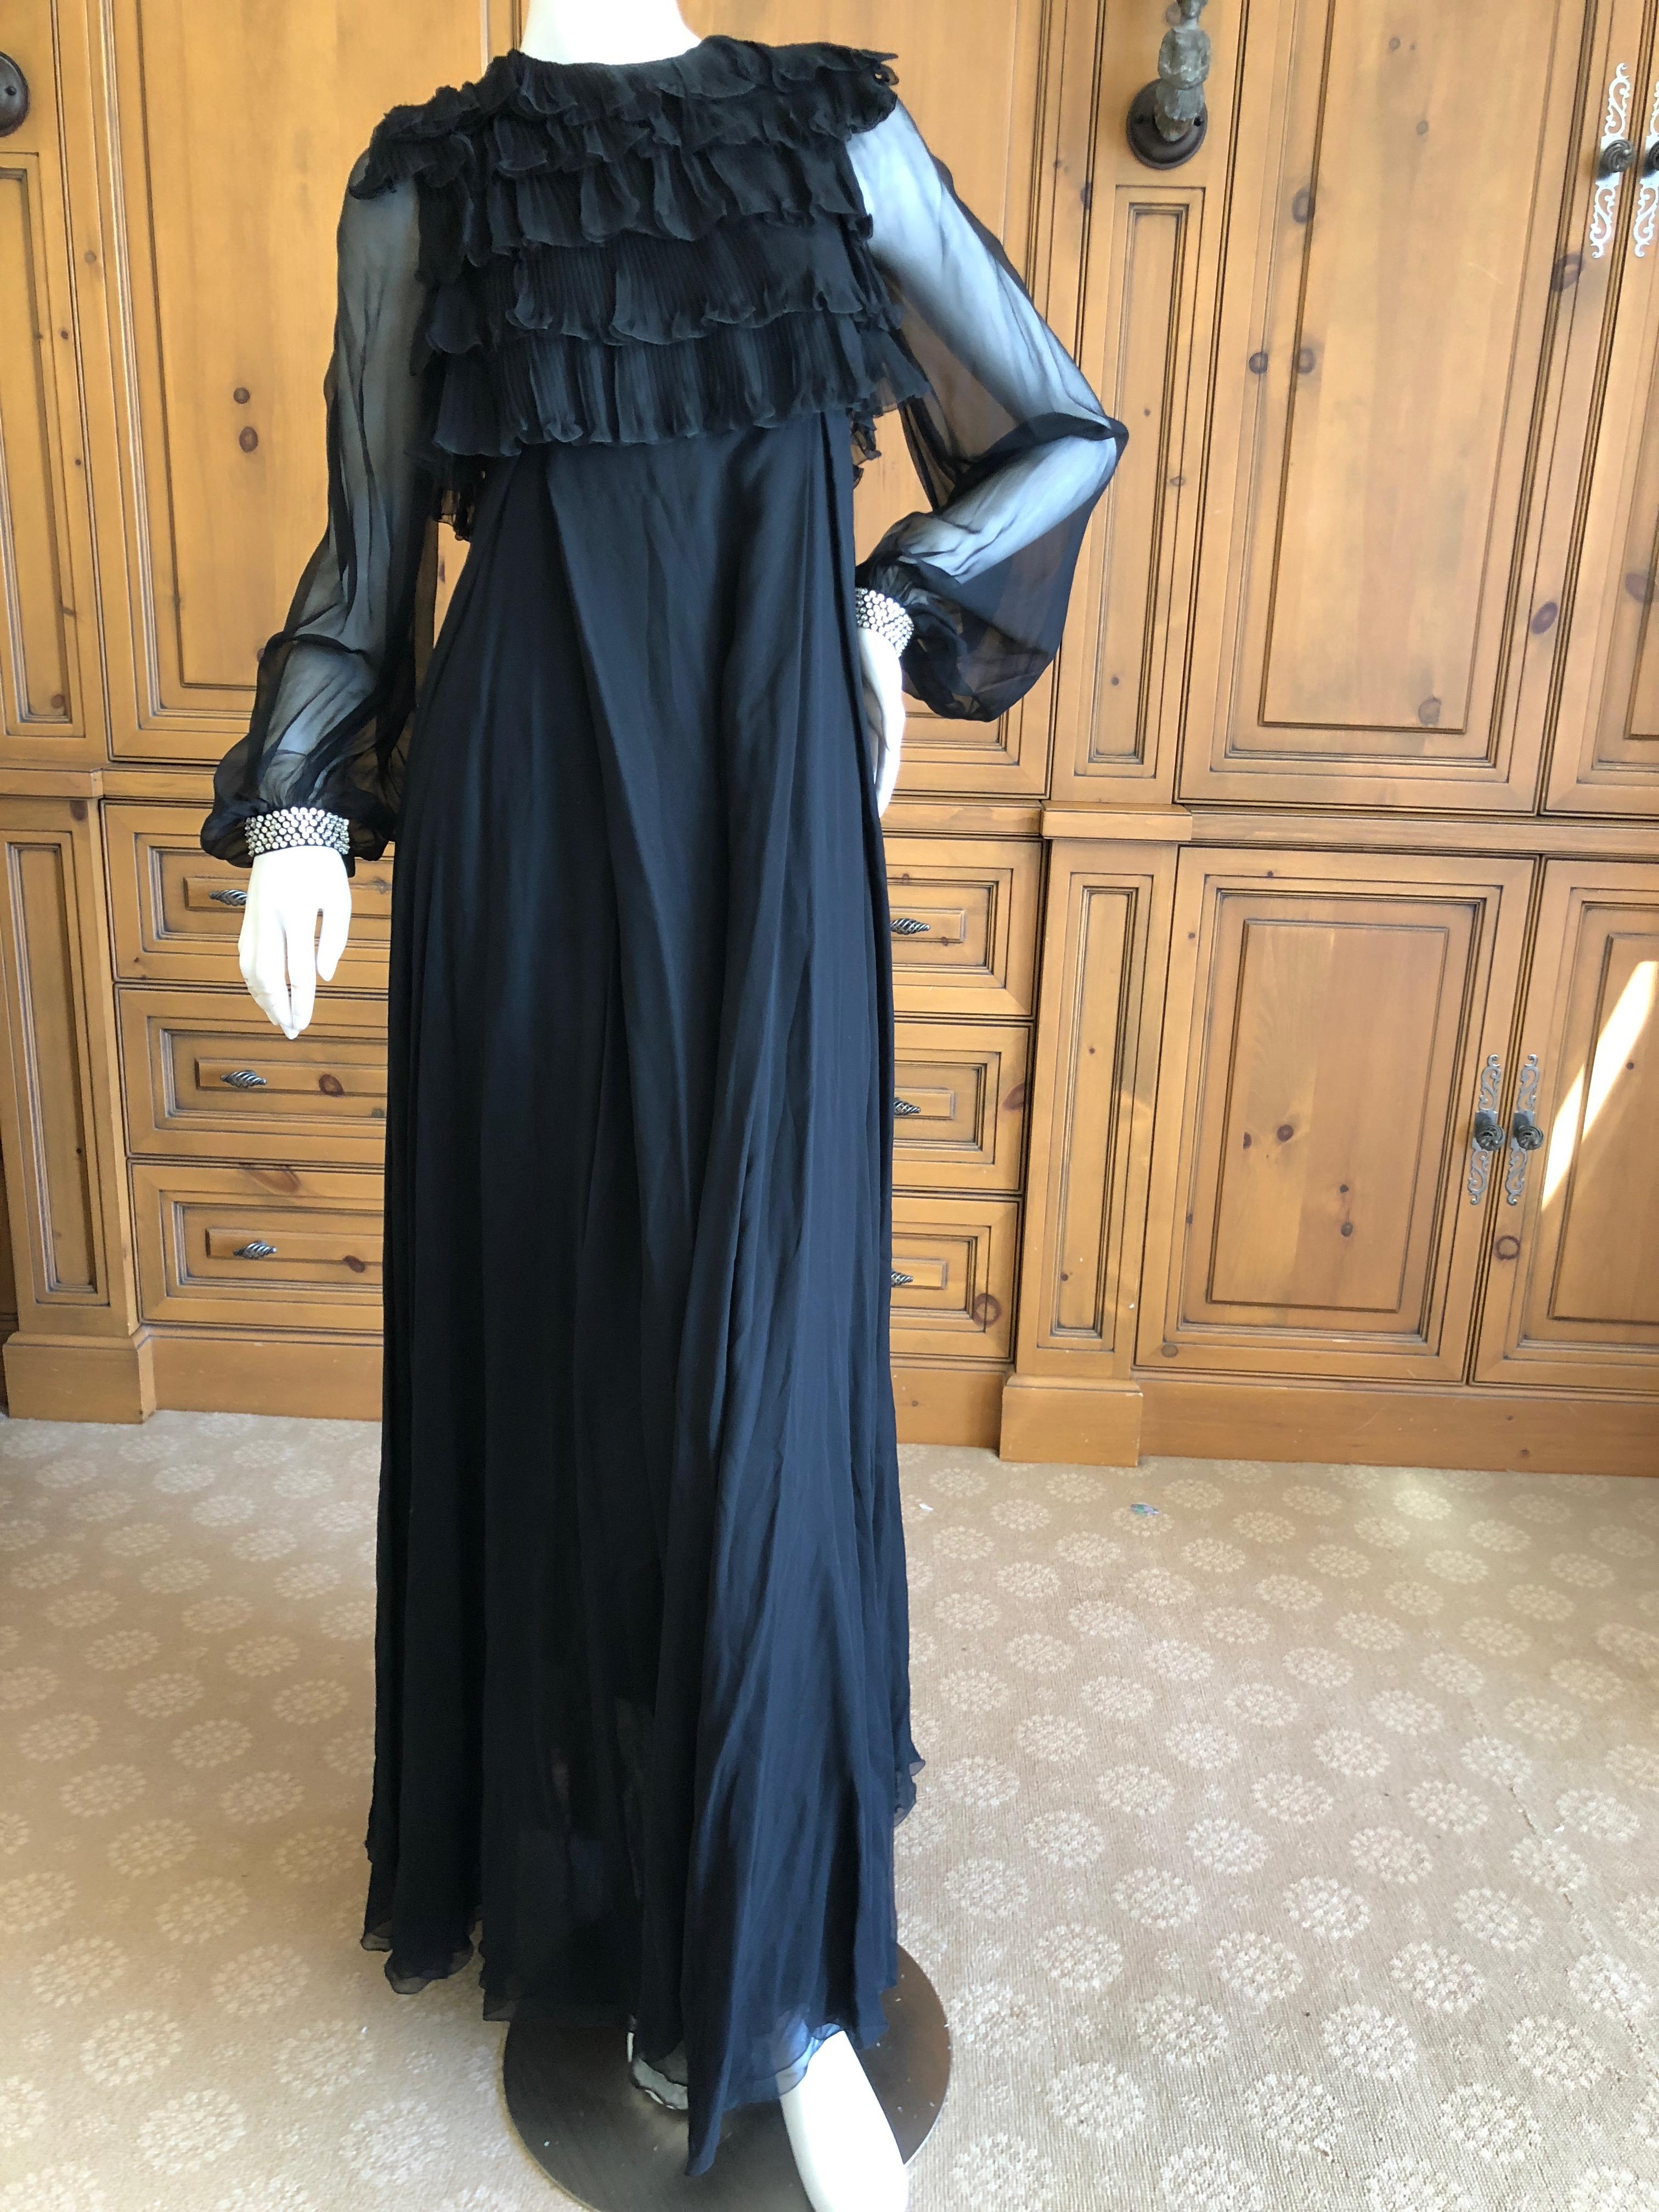 Cardinali 1970's Black Silk Evening Dress with Palazzo Pants
From the Archive of Marilyn Lewis, the creator of Cardinali
Cardinali was founded in Los Angeles in 1970, by Marilyn Lewis, who had already found success as the founder and owner of the